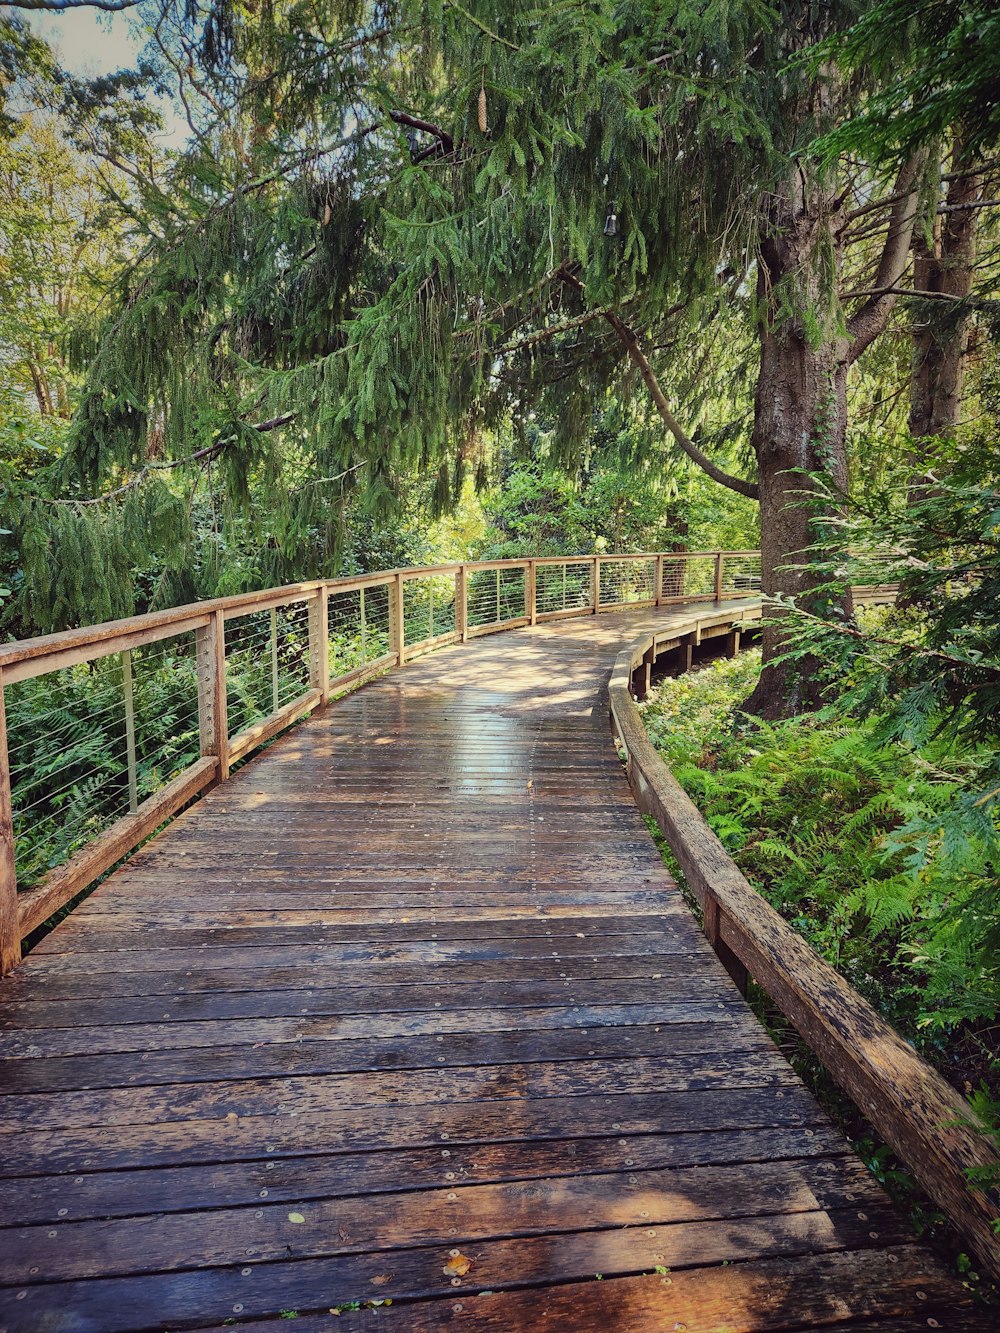 a wooden walkway in a forest with lots of trees